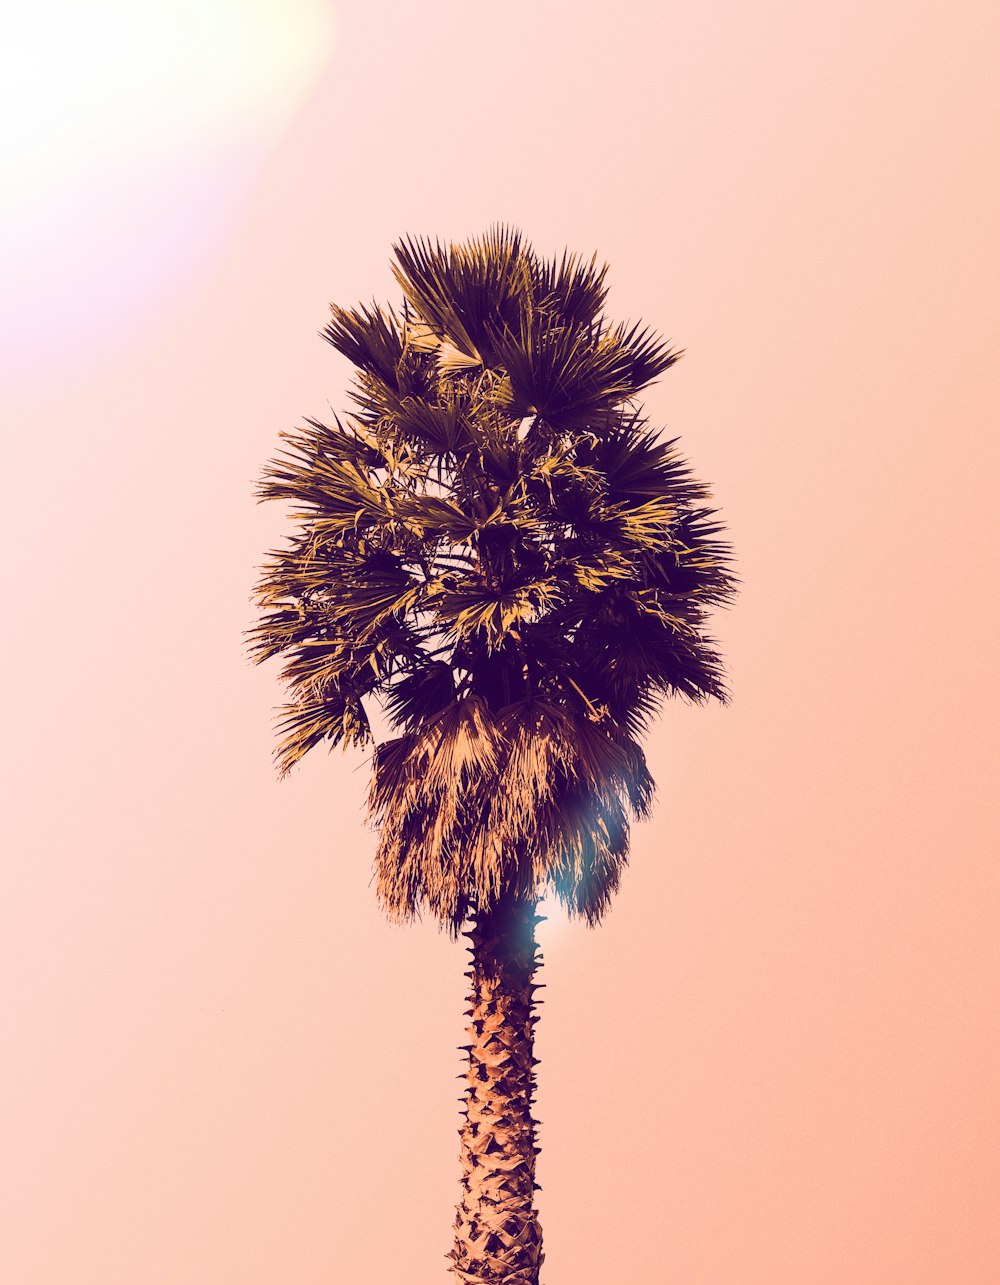 a palm tree with a pink sky in the background